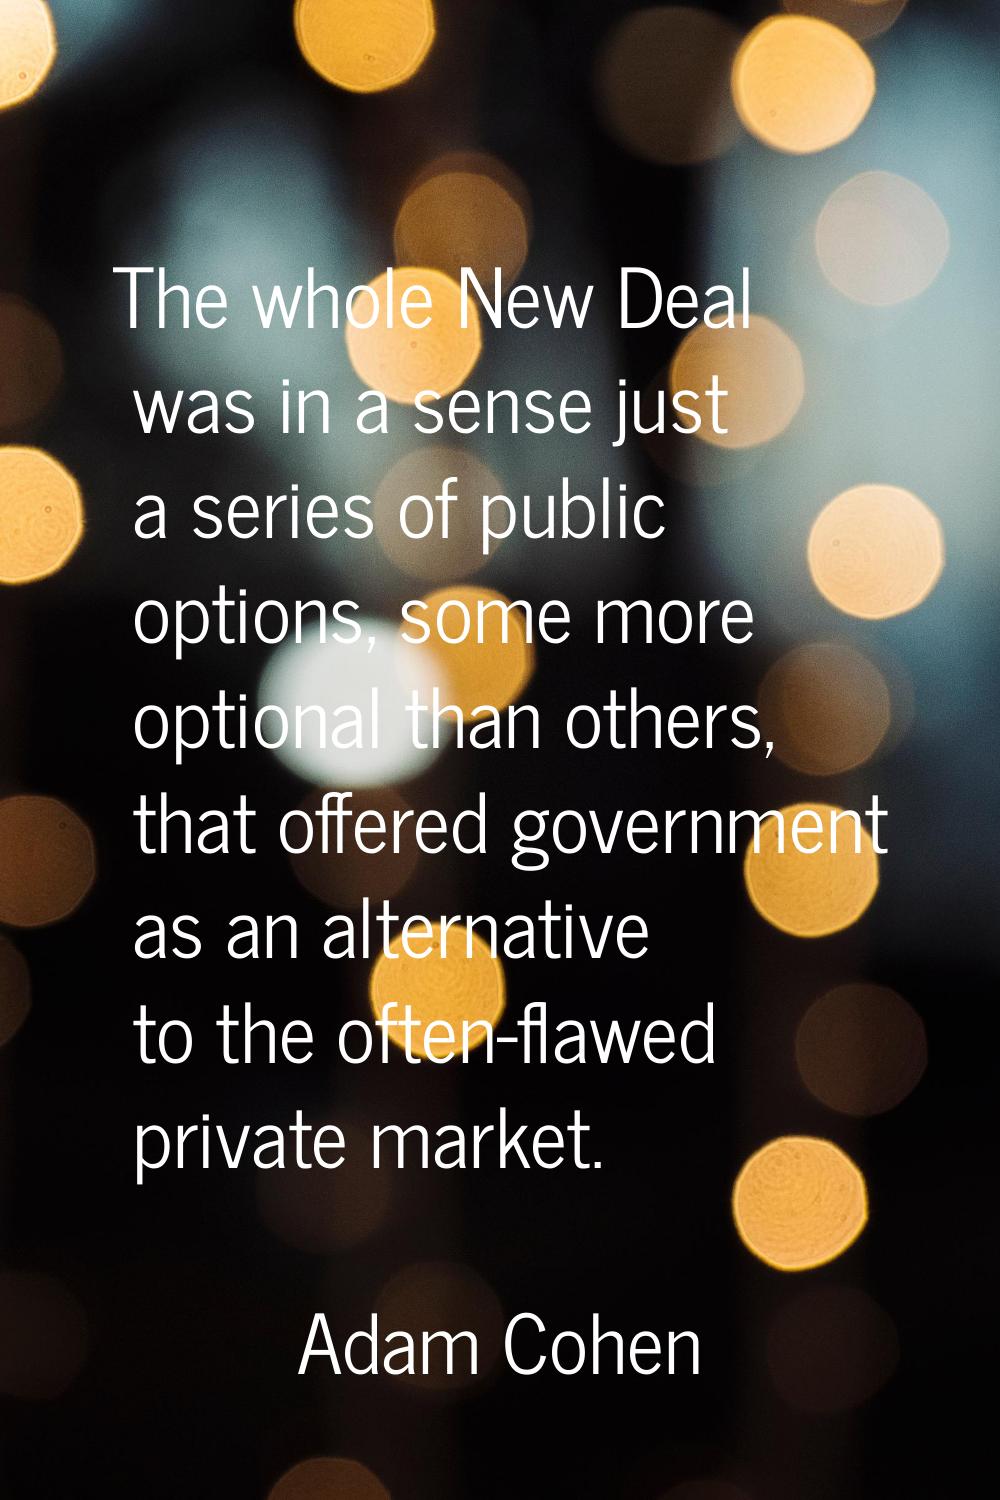 The whole New Deal was in a sense just a series of public options, some more optional than others, 